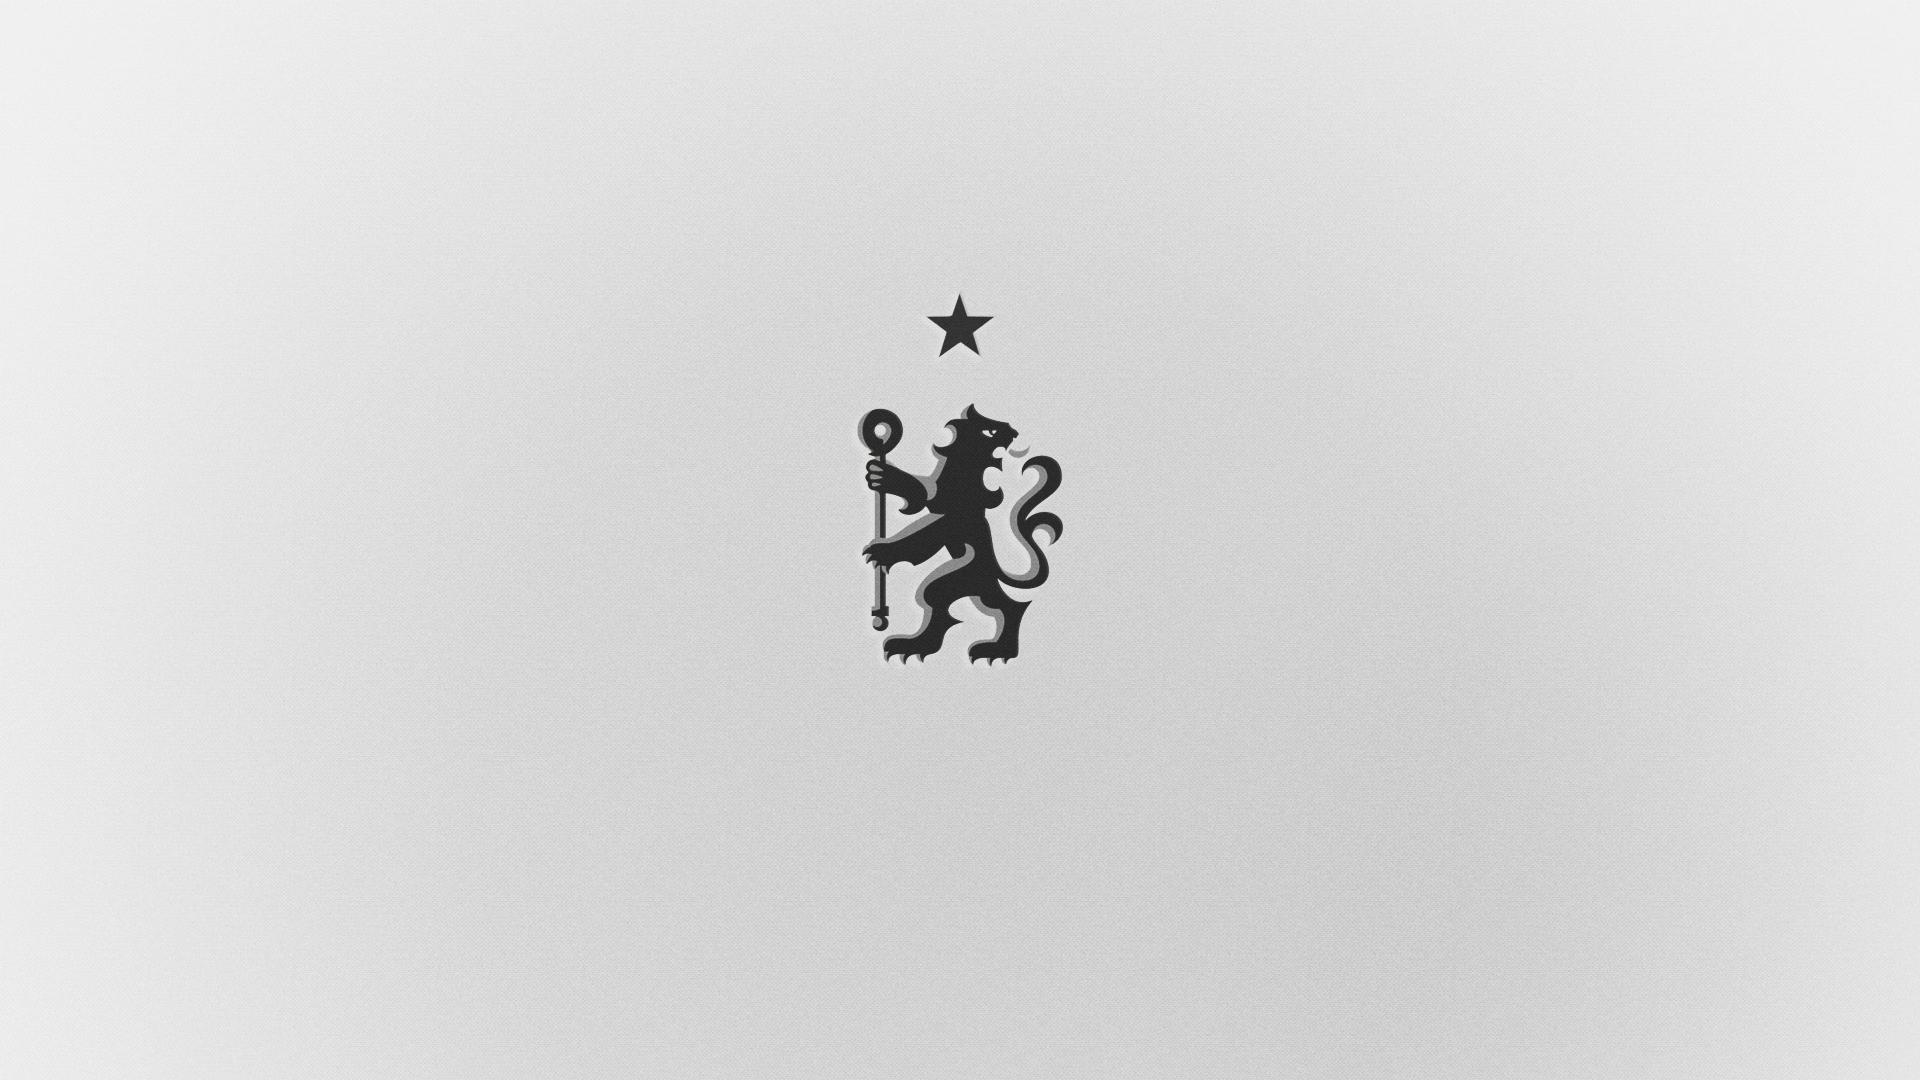 General 1920x1080 Chelsea Chelsea FC England soccer minimalism soccer clubs white background simple background